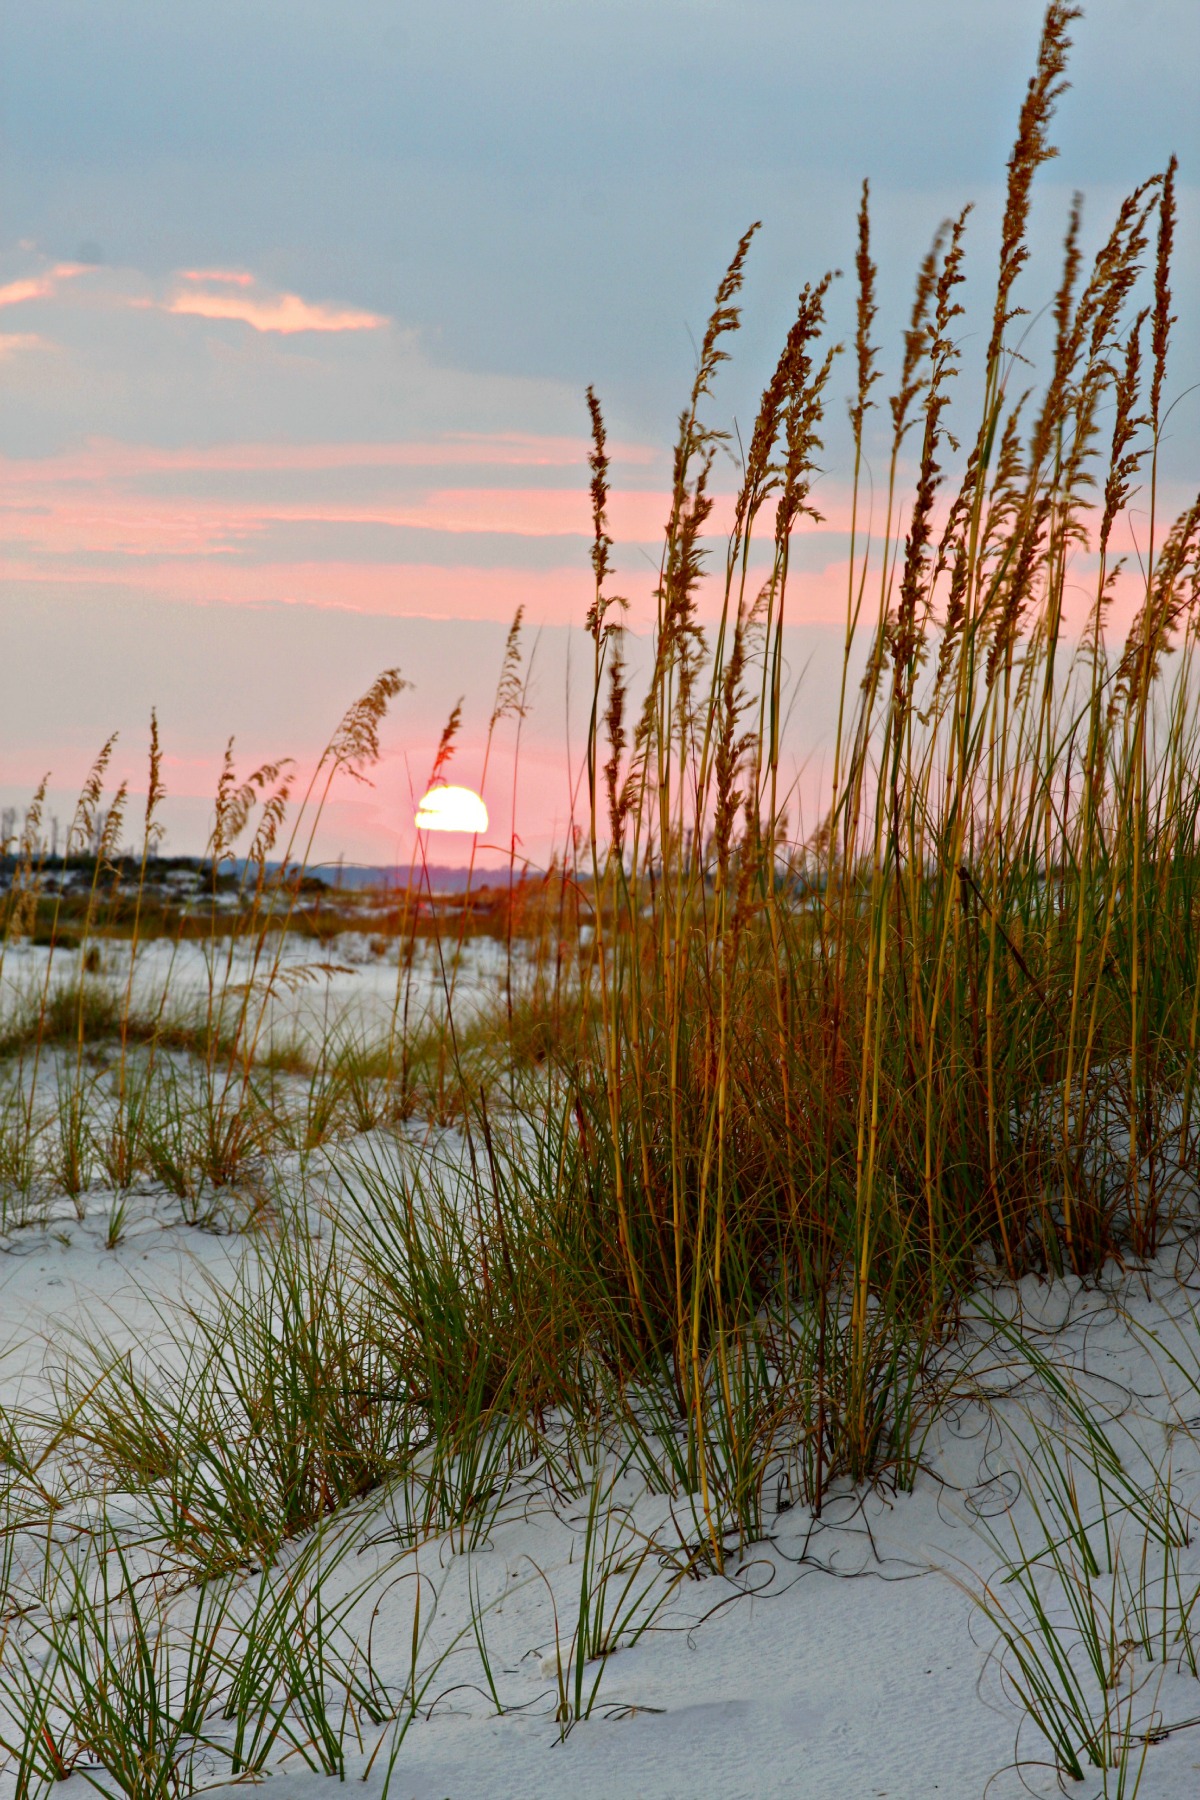 sunset over dunes and sea oats